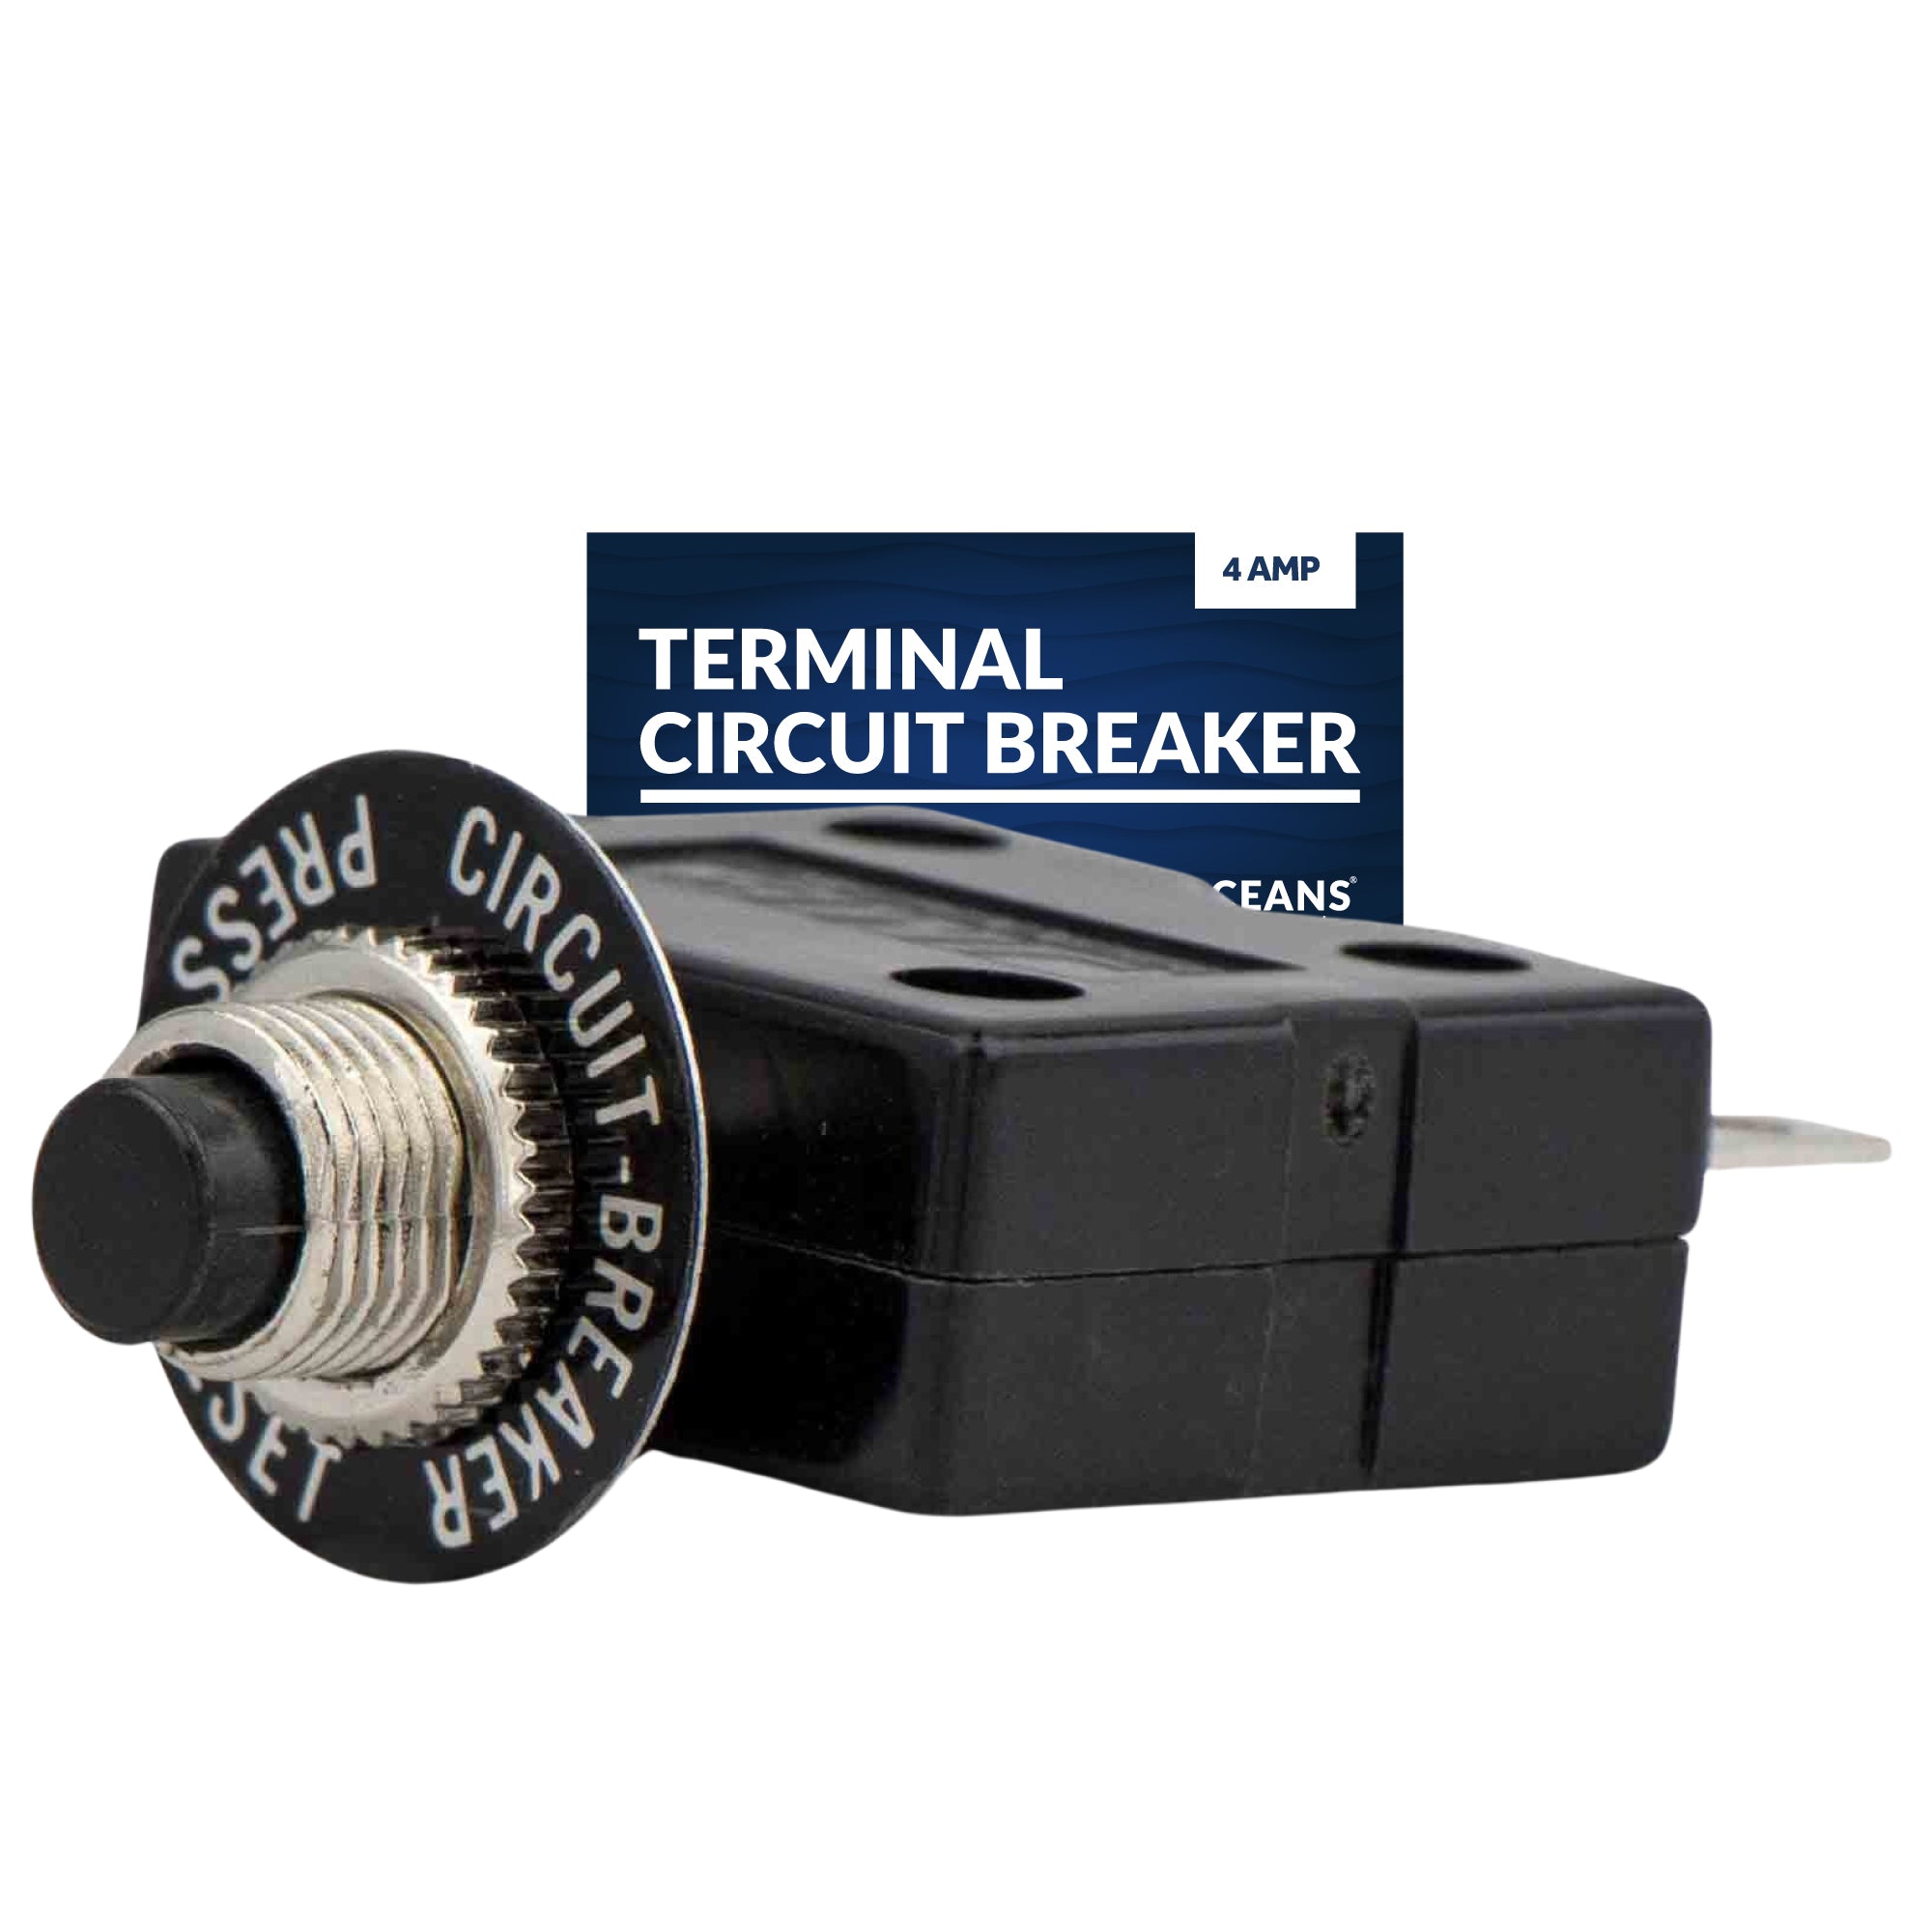 Terminal Circuit Breaker with Reset Button, 4 Amp - FO1677